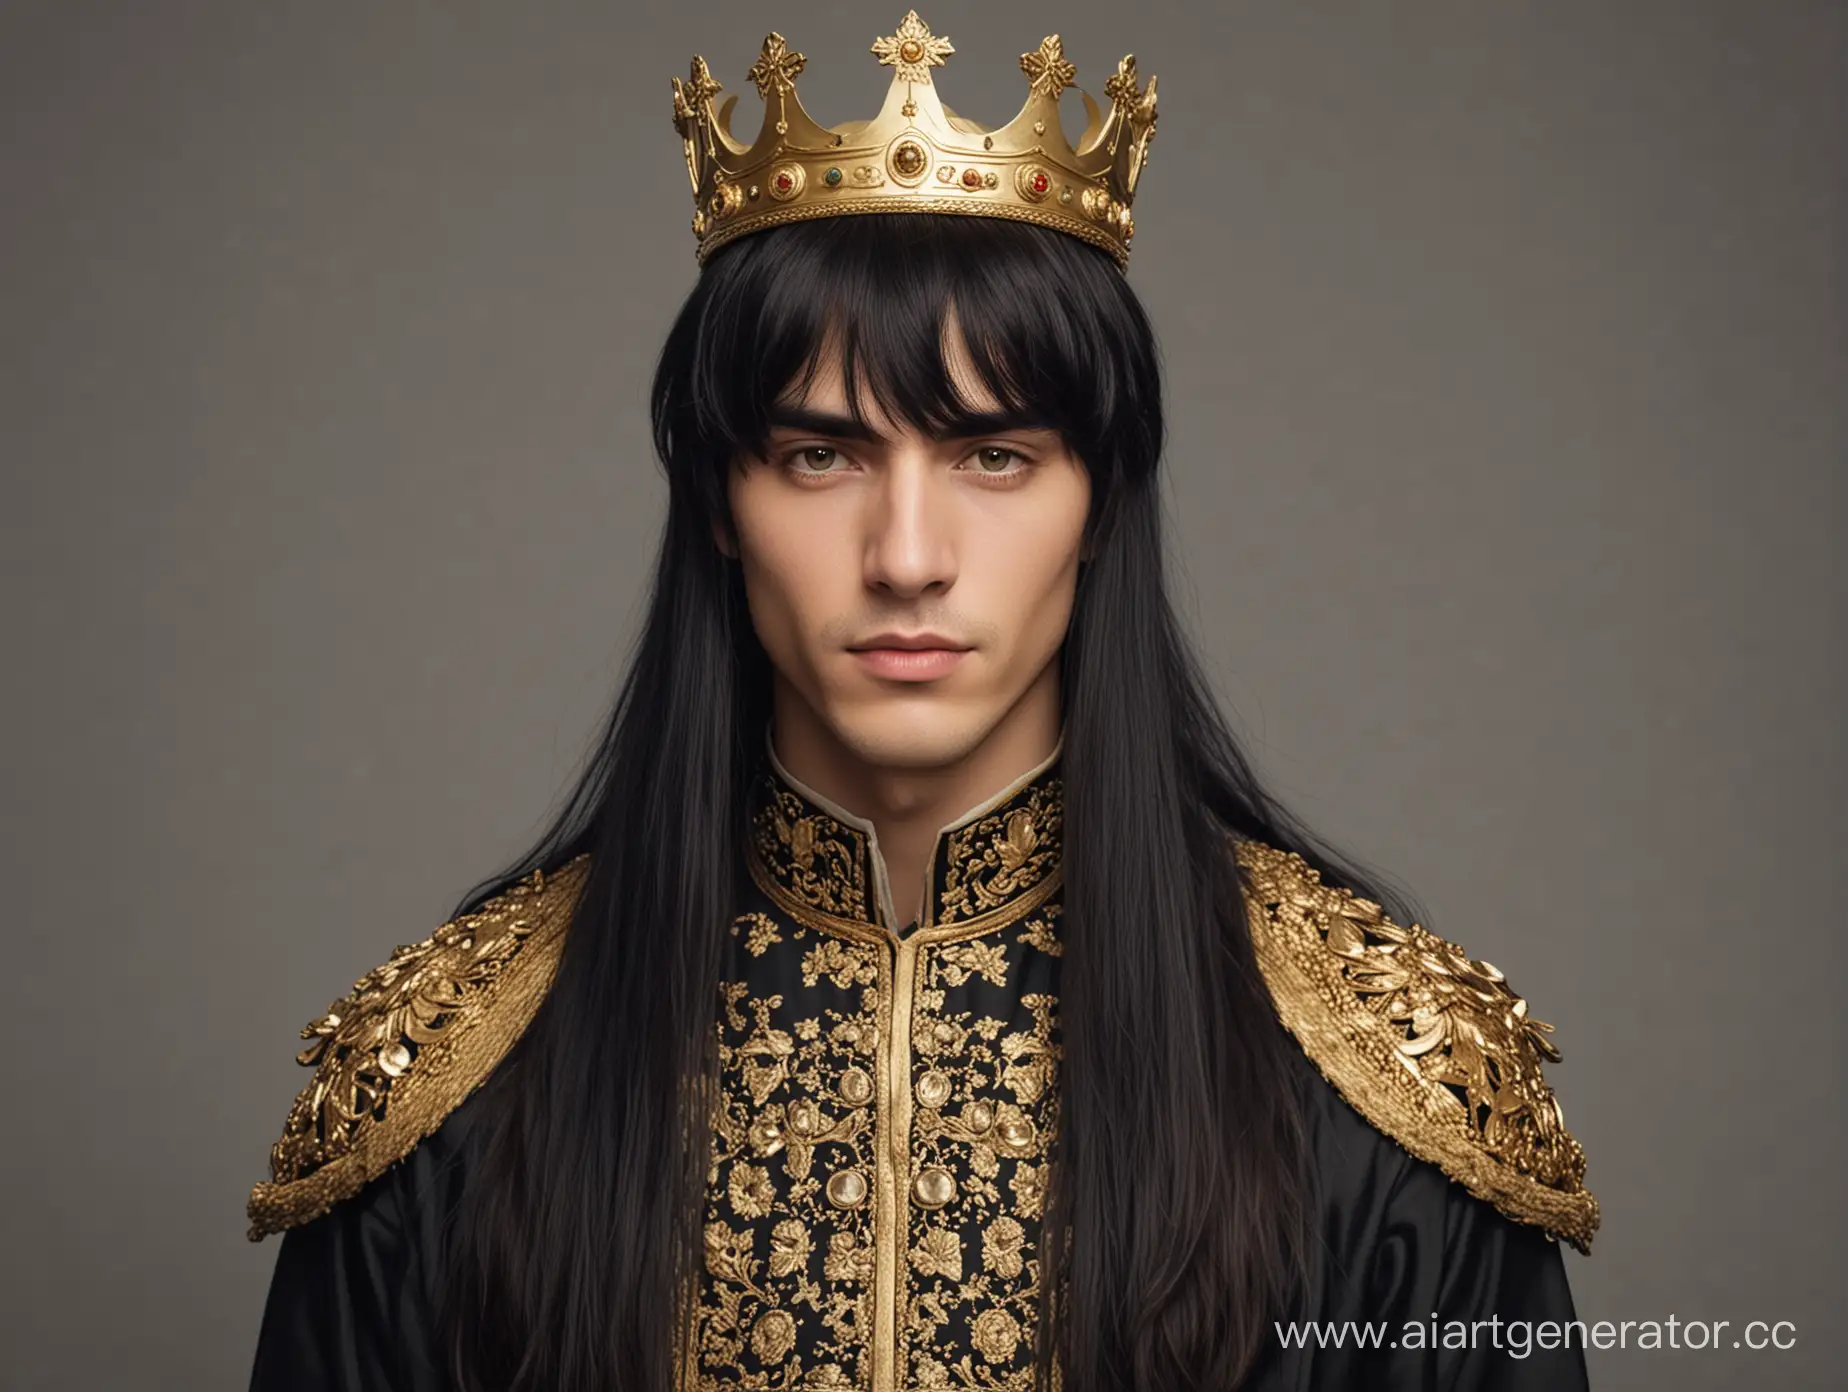 Young-King-with-Golden-Crown-and-Black-Hair-Bangs-to-the-Right